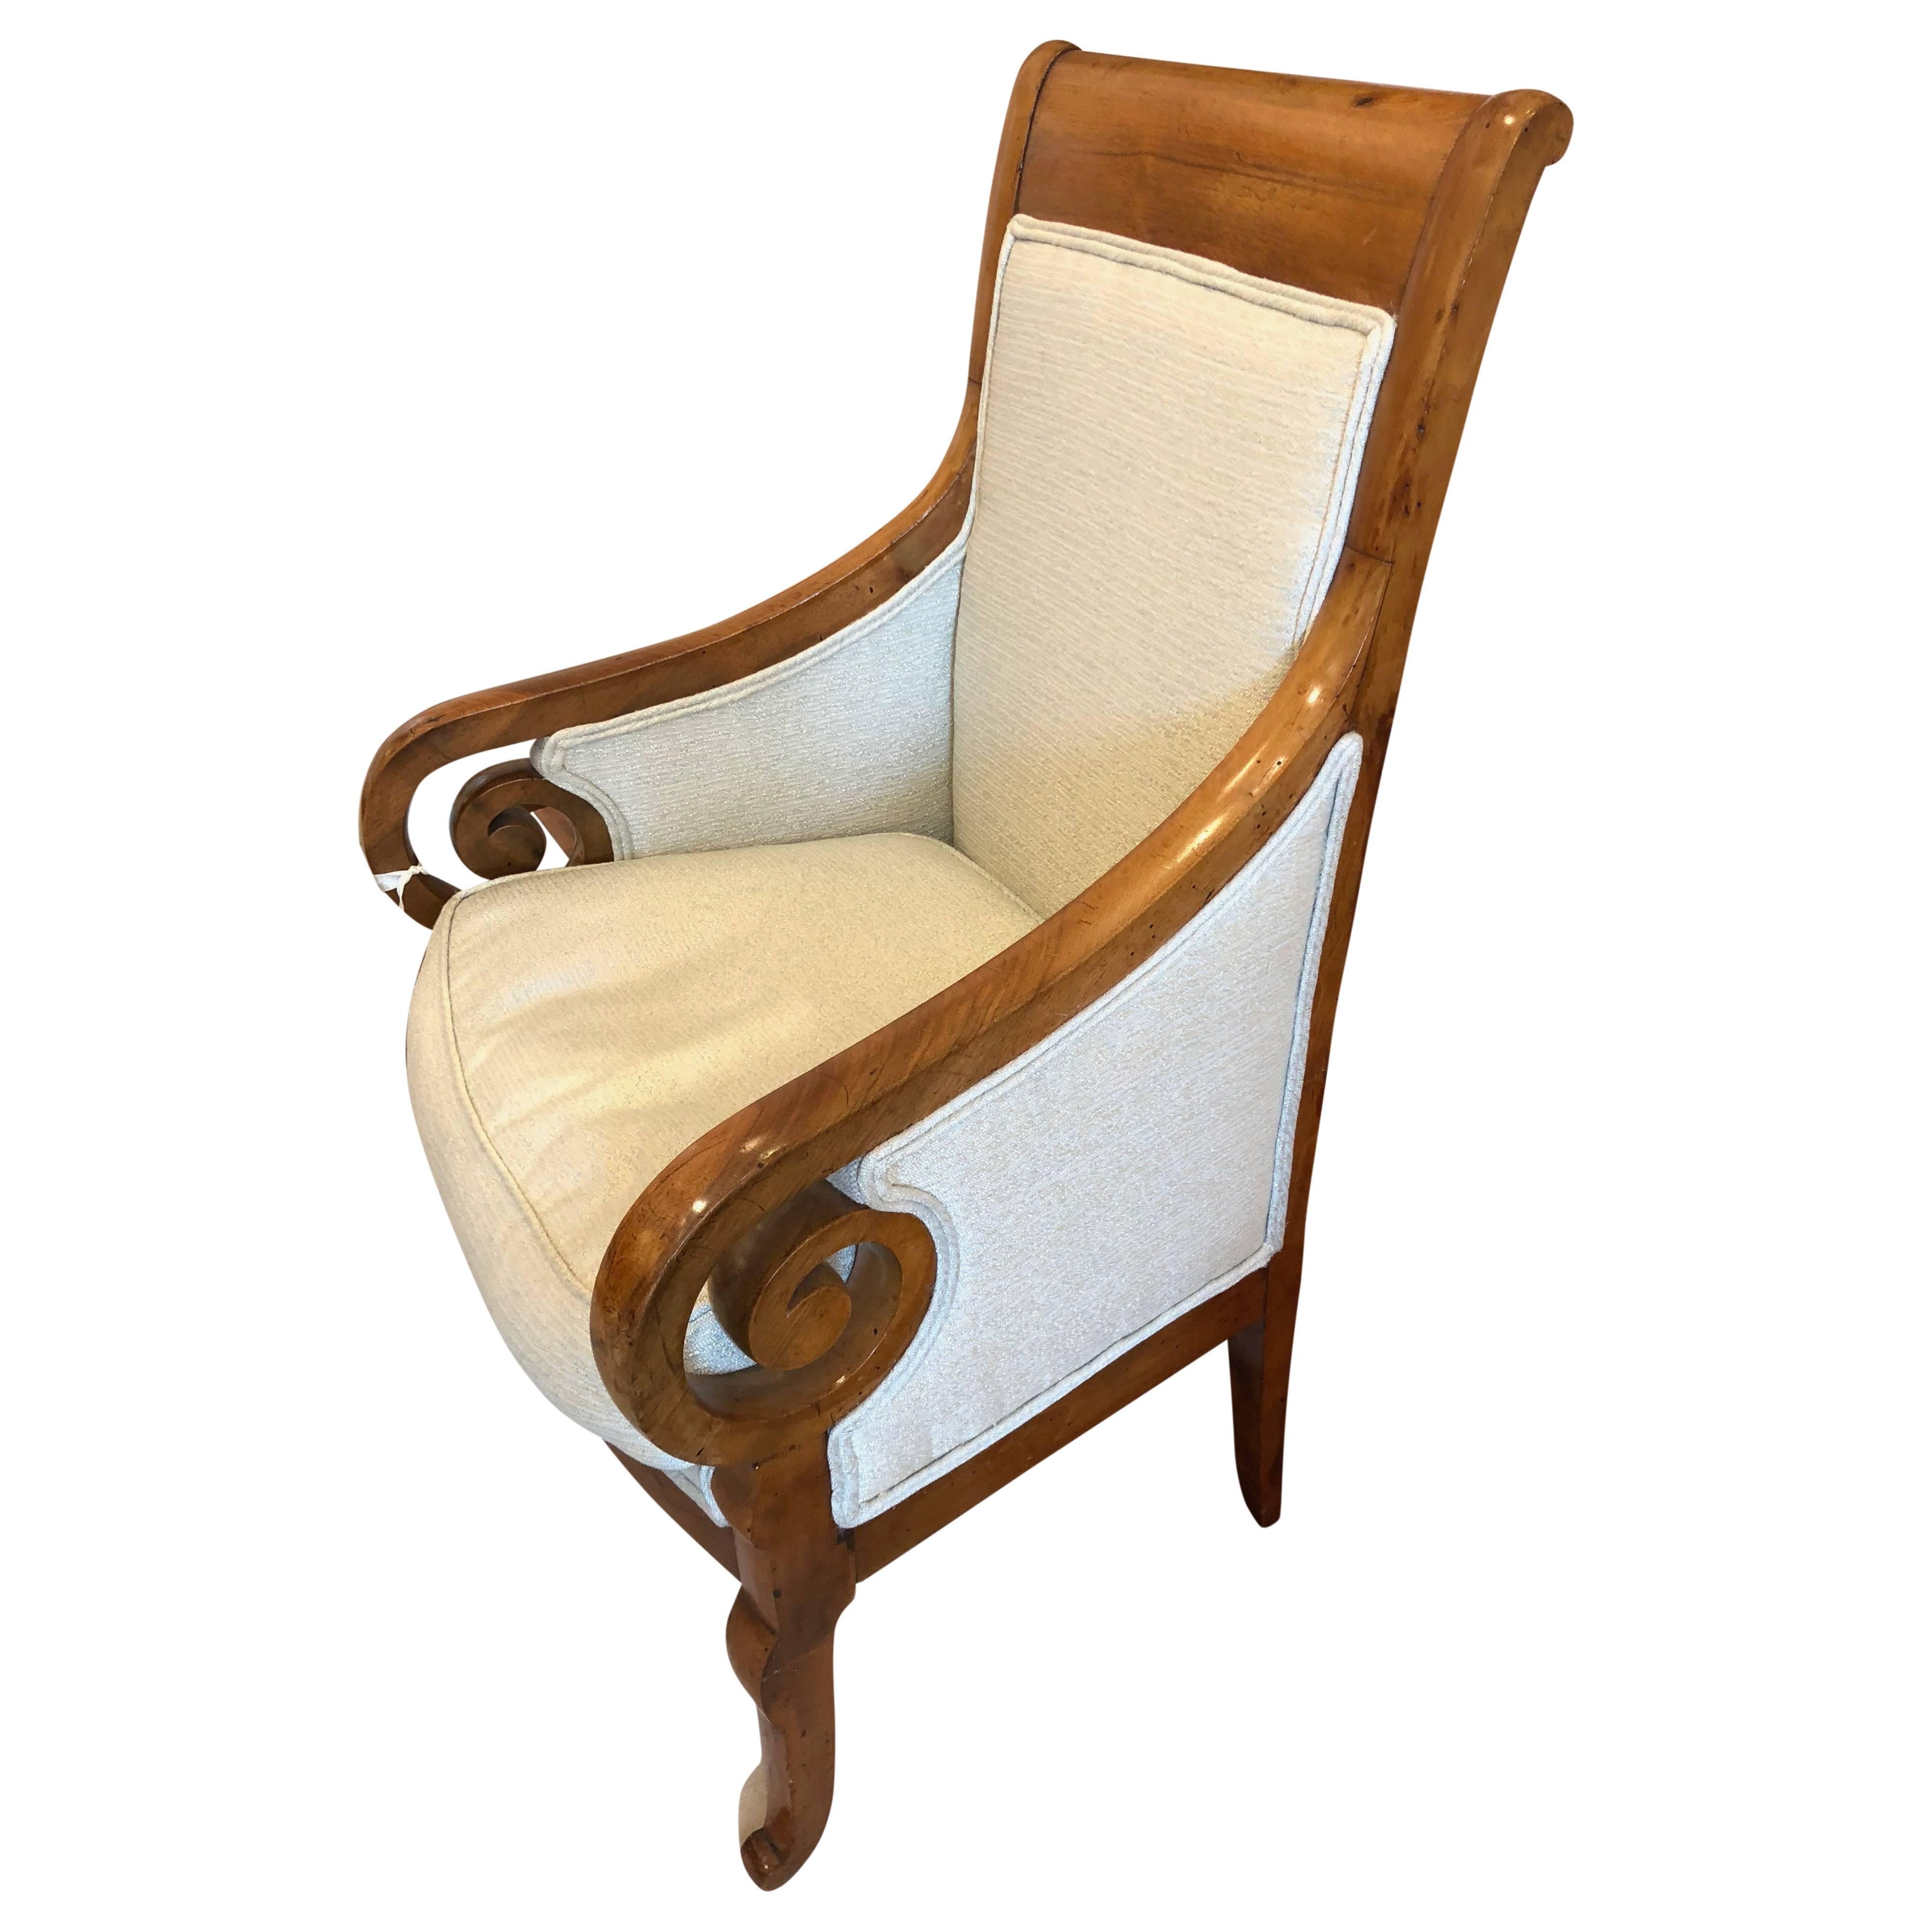 These antique midcentury walnut chairs are customized in a rich Nancy Corzine seafoam fabric. The scroll arms and unique backing make them a one of a kind set. Pair with the perfect cut velvet pillow and you have a Classic style mixed with a modern